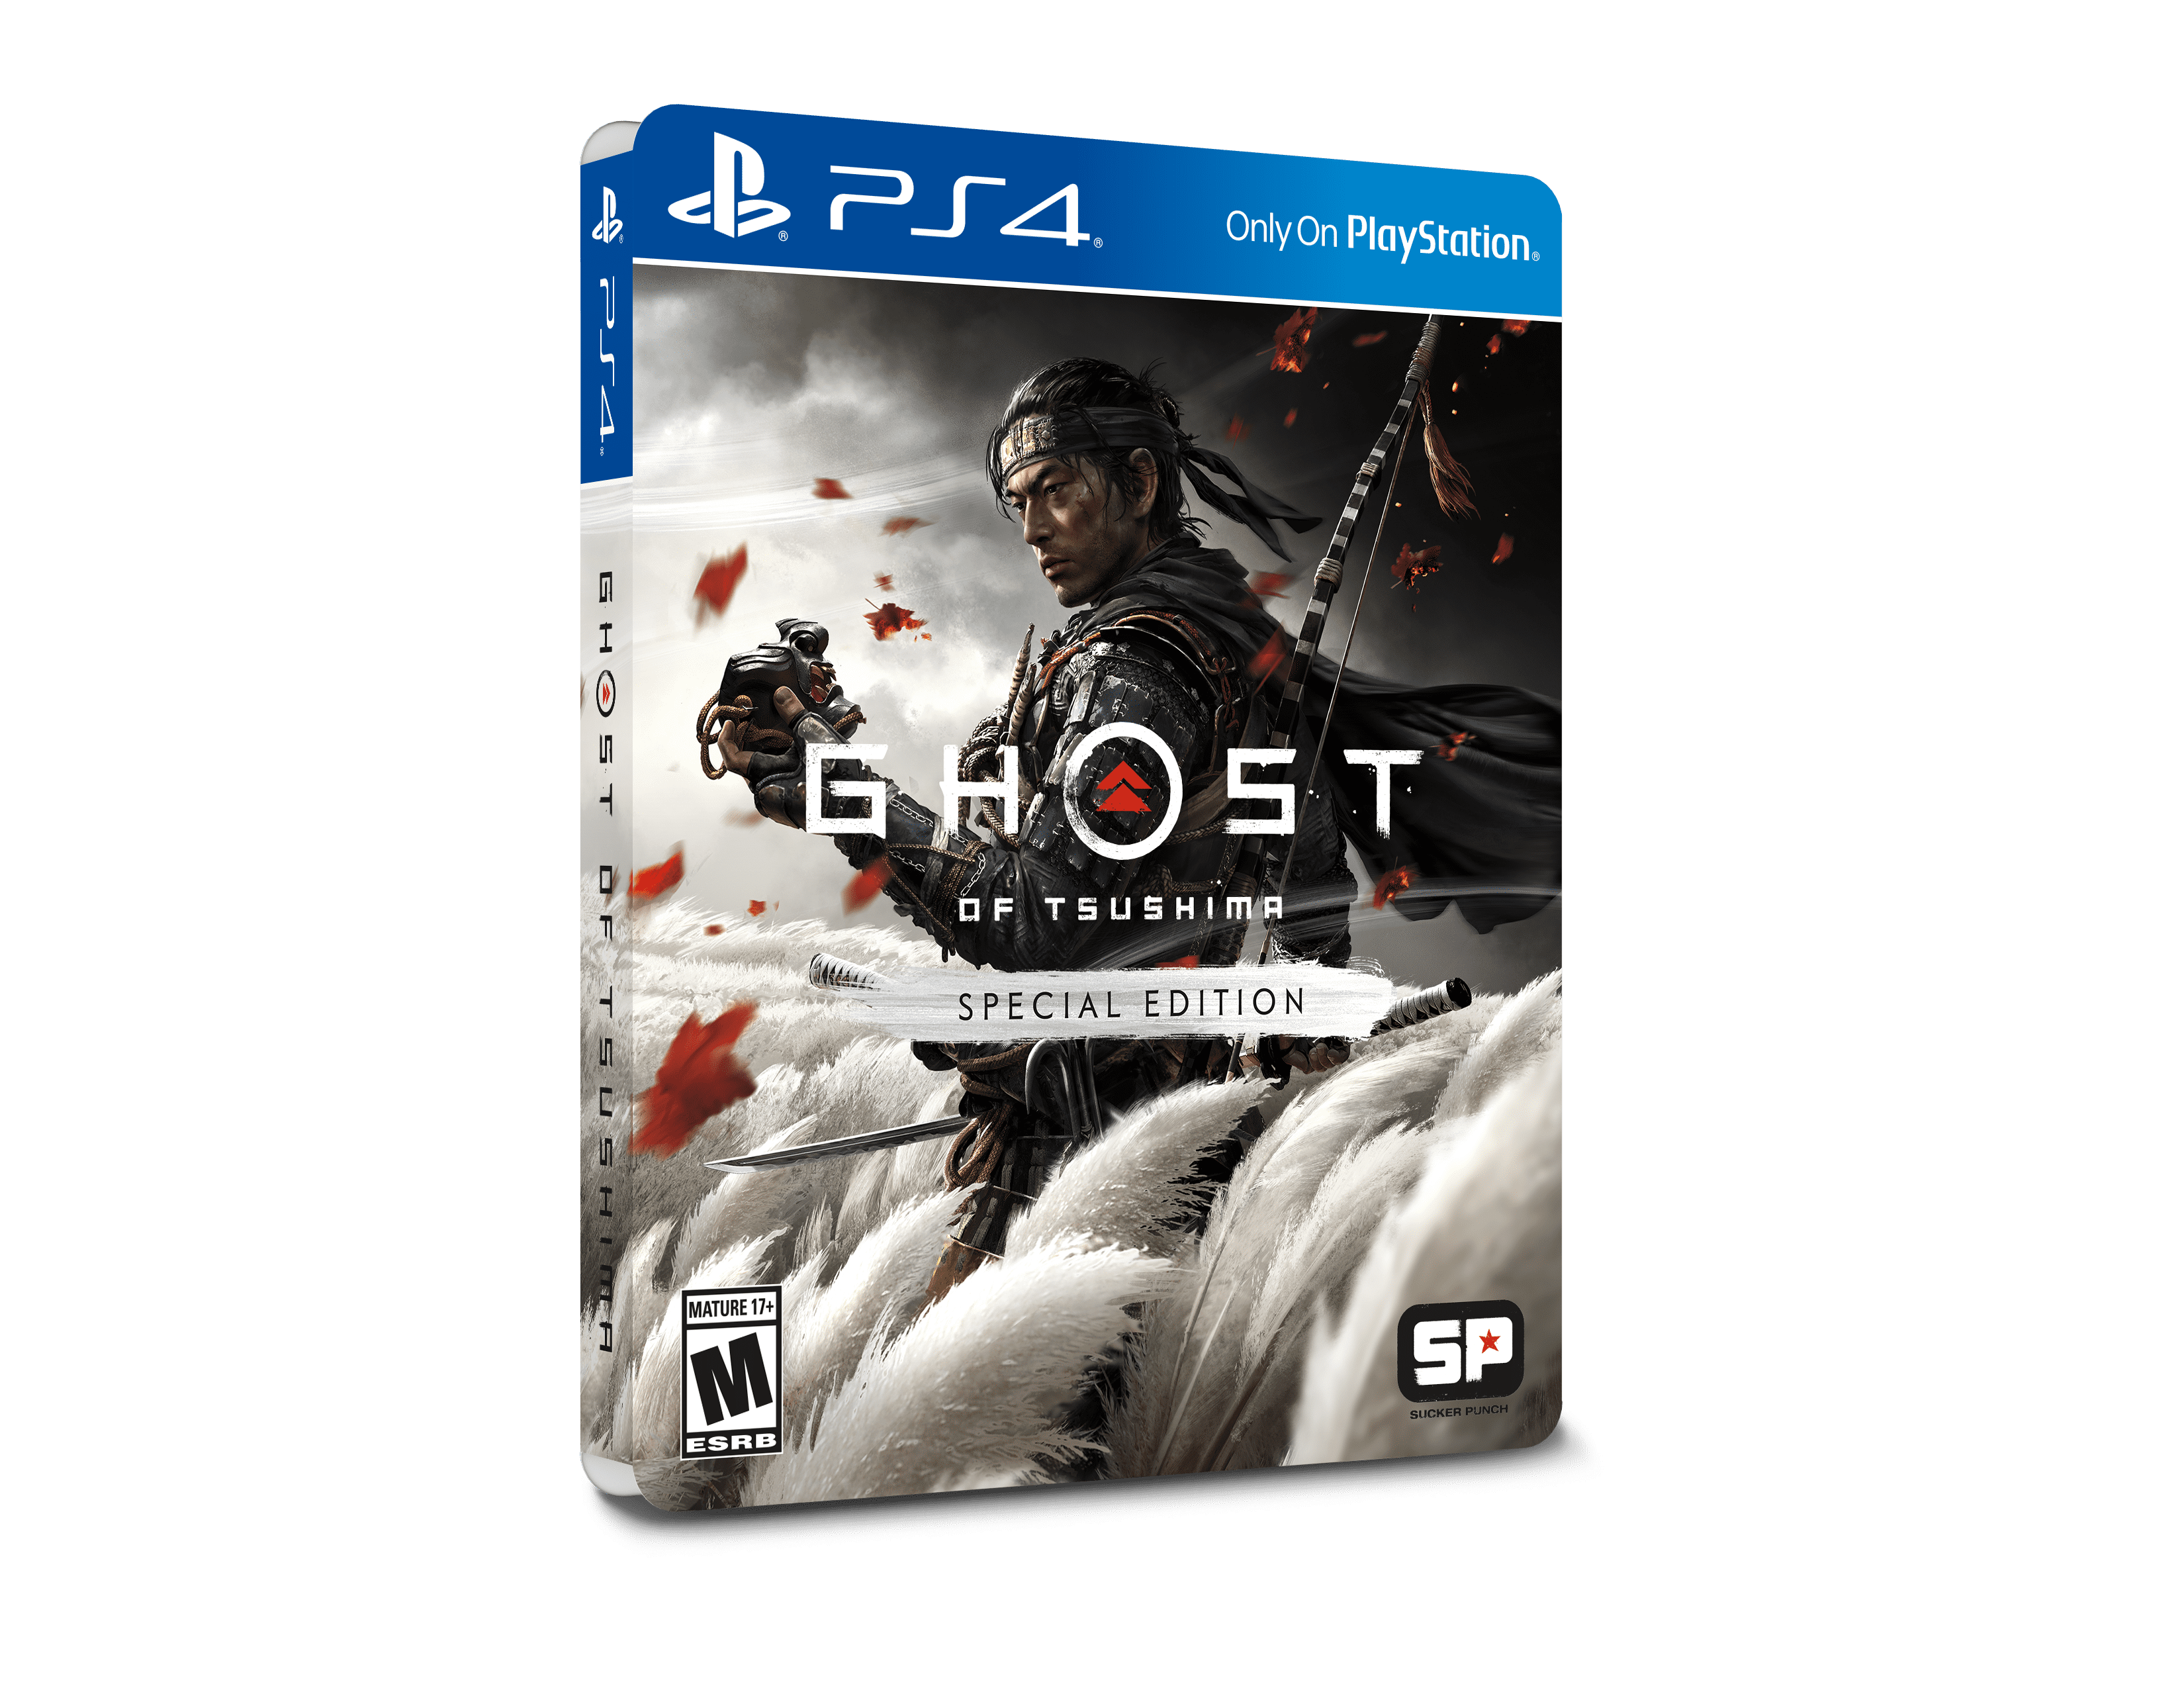 Special Tsushima Edition, Ghost Sony, of PlayStation 4